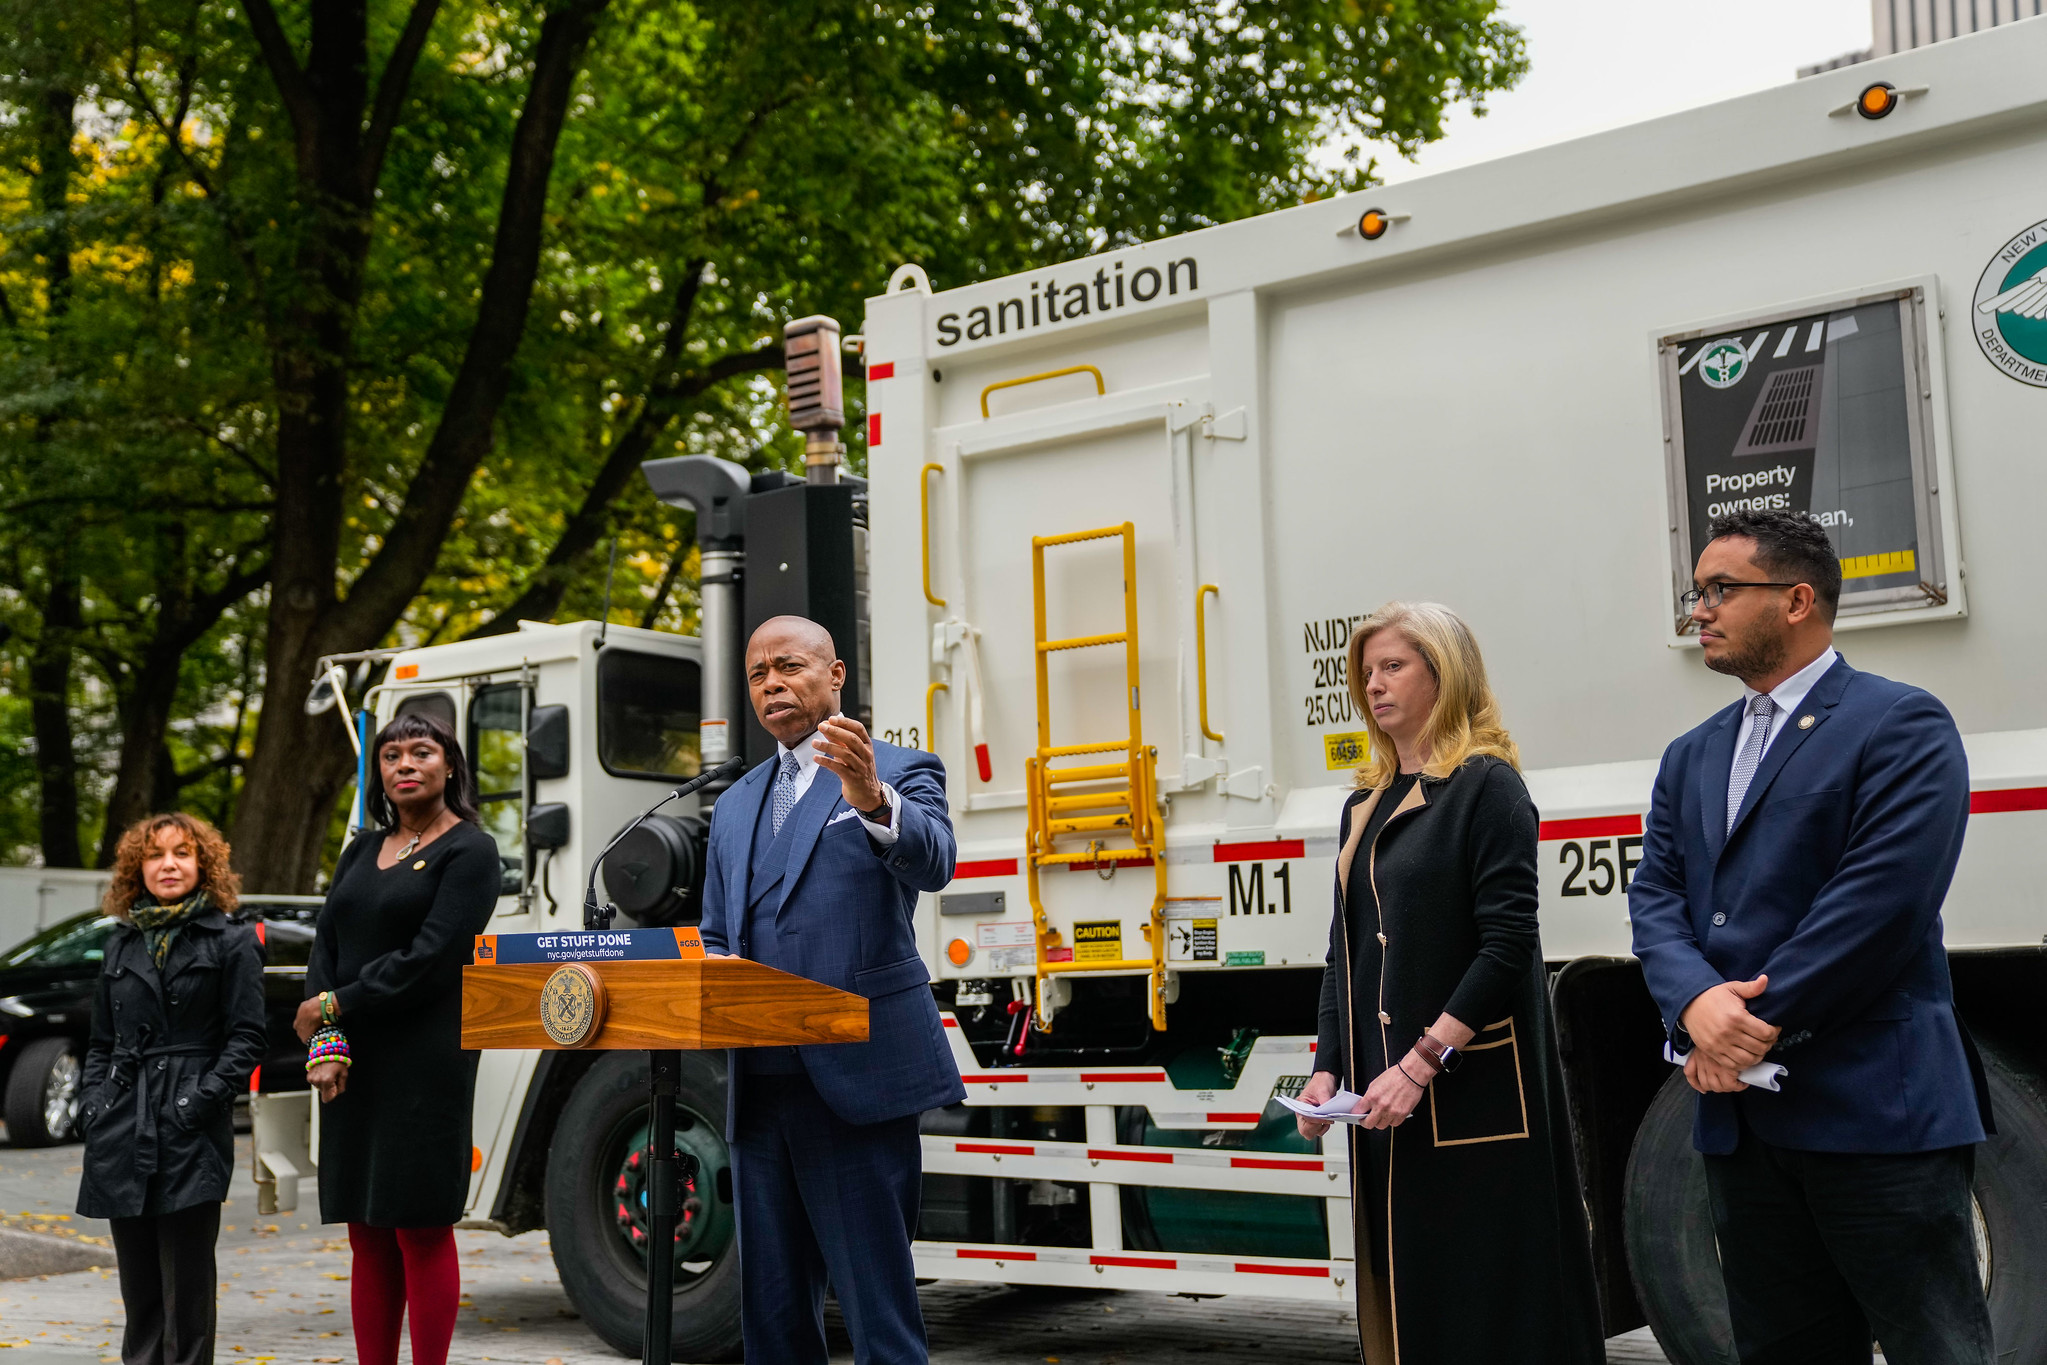 Mayor Eric Adams, DSNY Sanitation Commissioner Jessica Tisch, and others stand in front of a DSNY truck to announce a new rule that would require New Yorkers to set their trash out no earlier than 8 p.m.